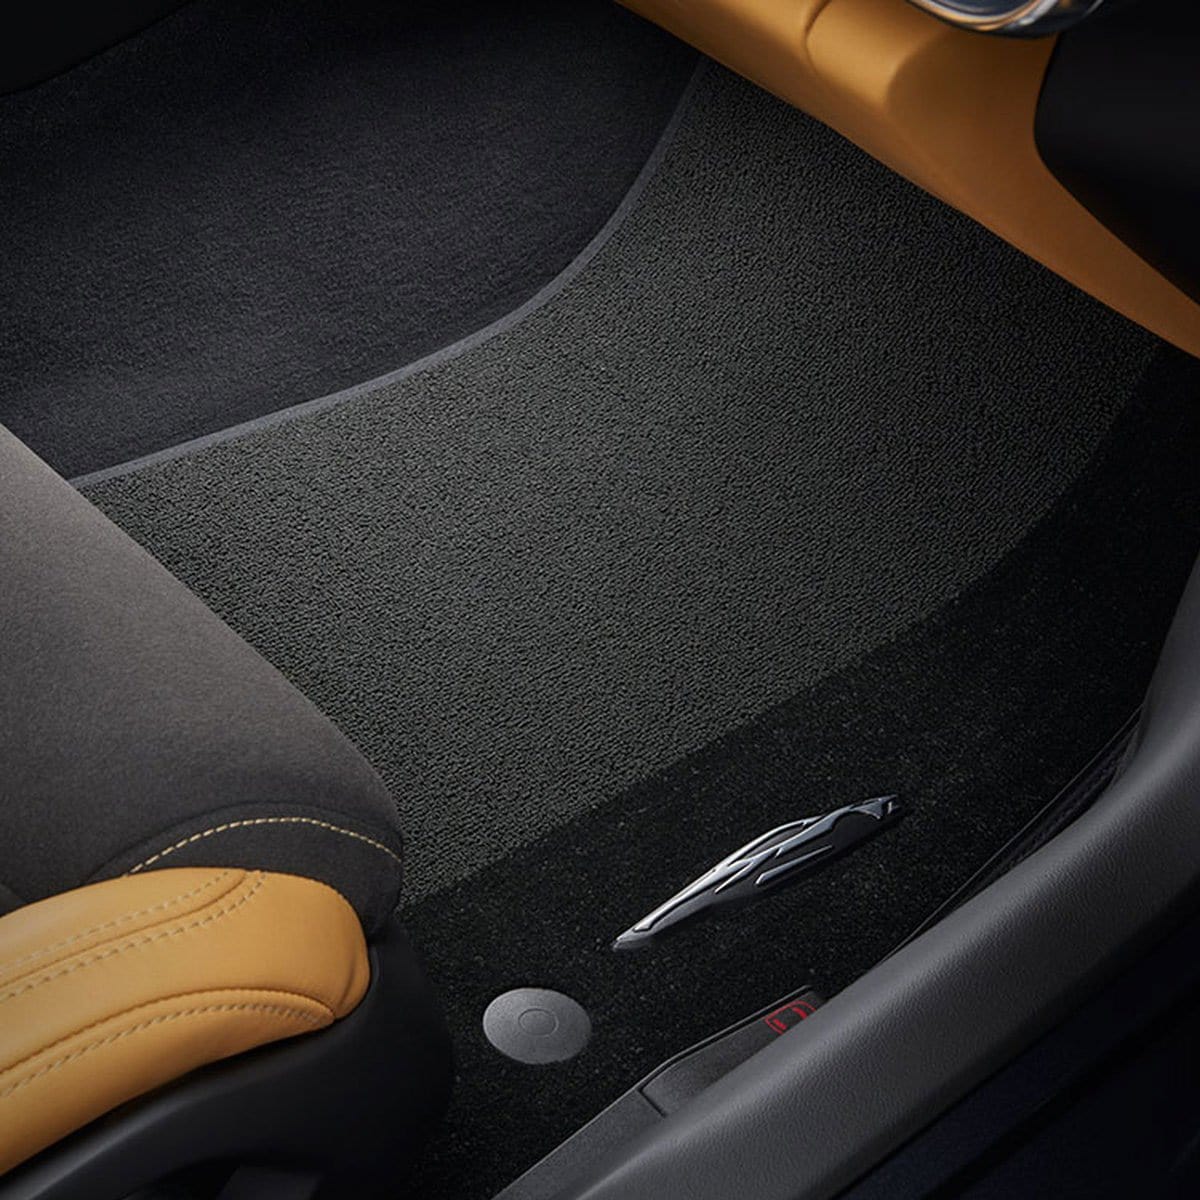 Black C8 Carpeted Floor Mats with Corvette Silhouette, SKU 50-4-029, protecting car's interior from debris and wear and tear.